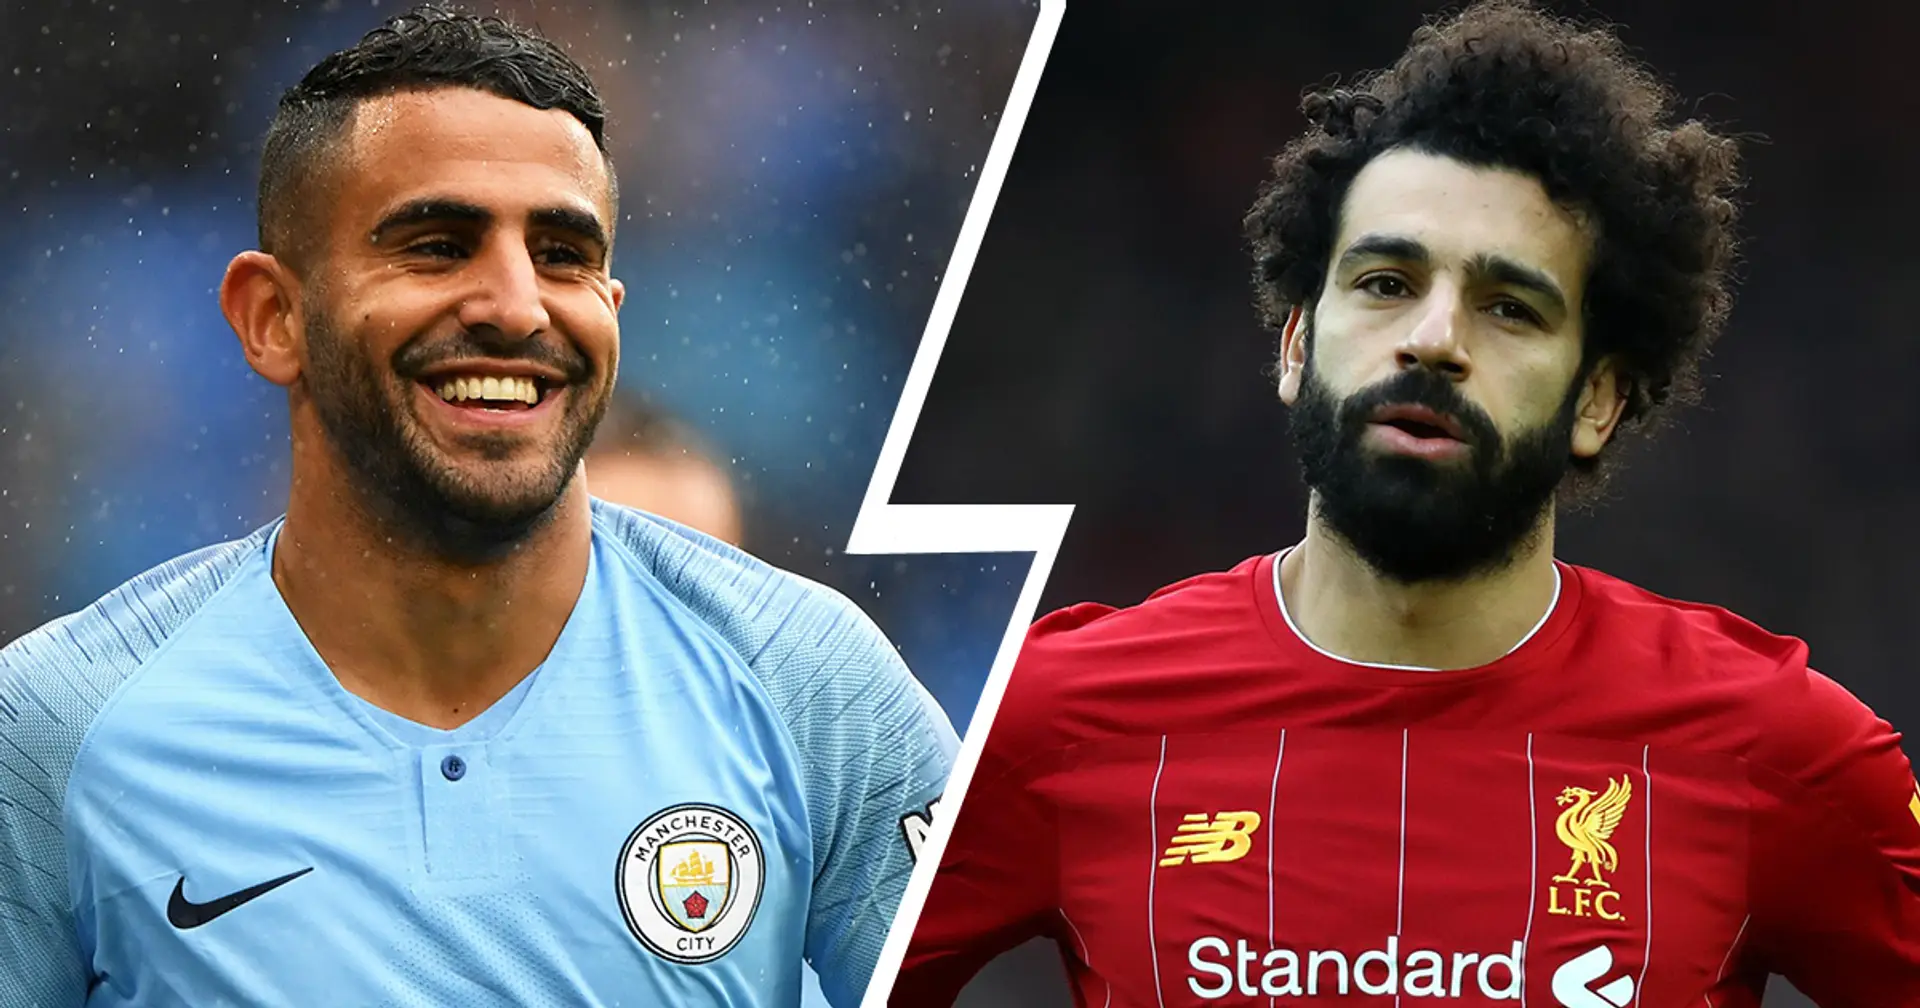 'If they lose': Riyadh Mahrez opens up about title-race against Liverpool